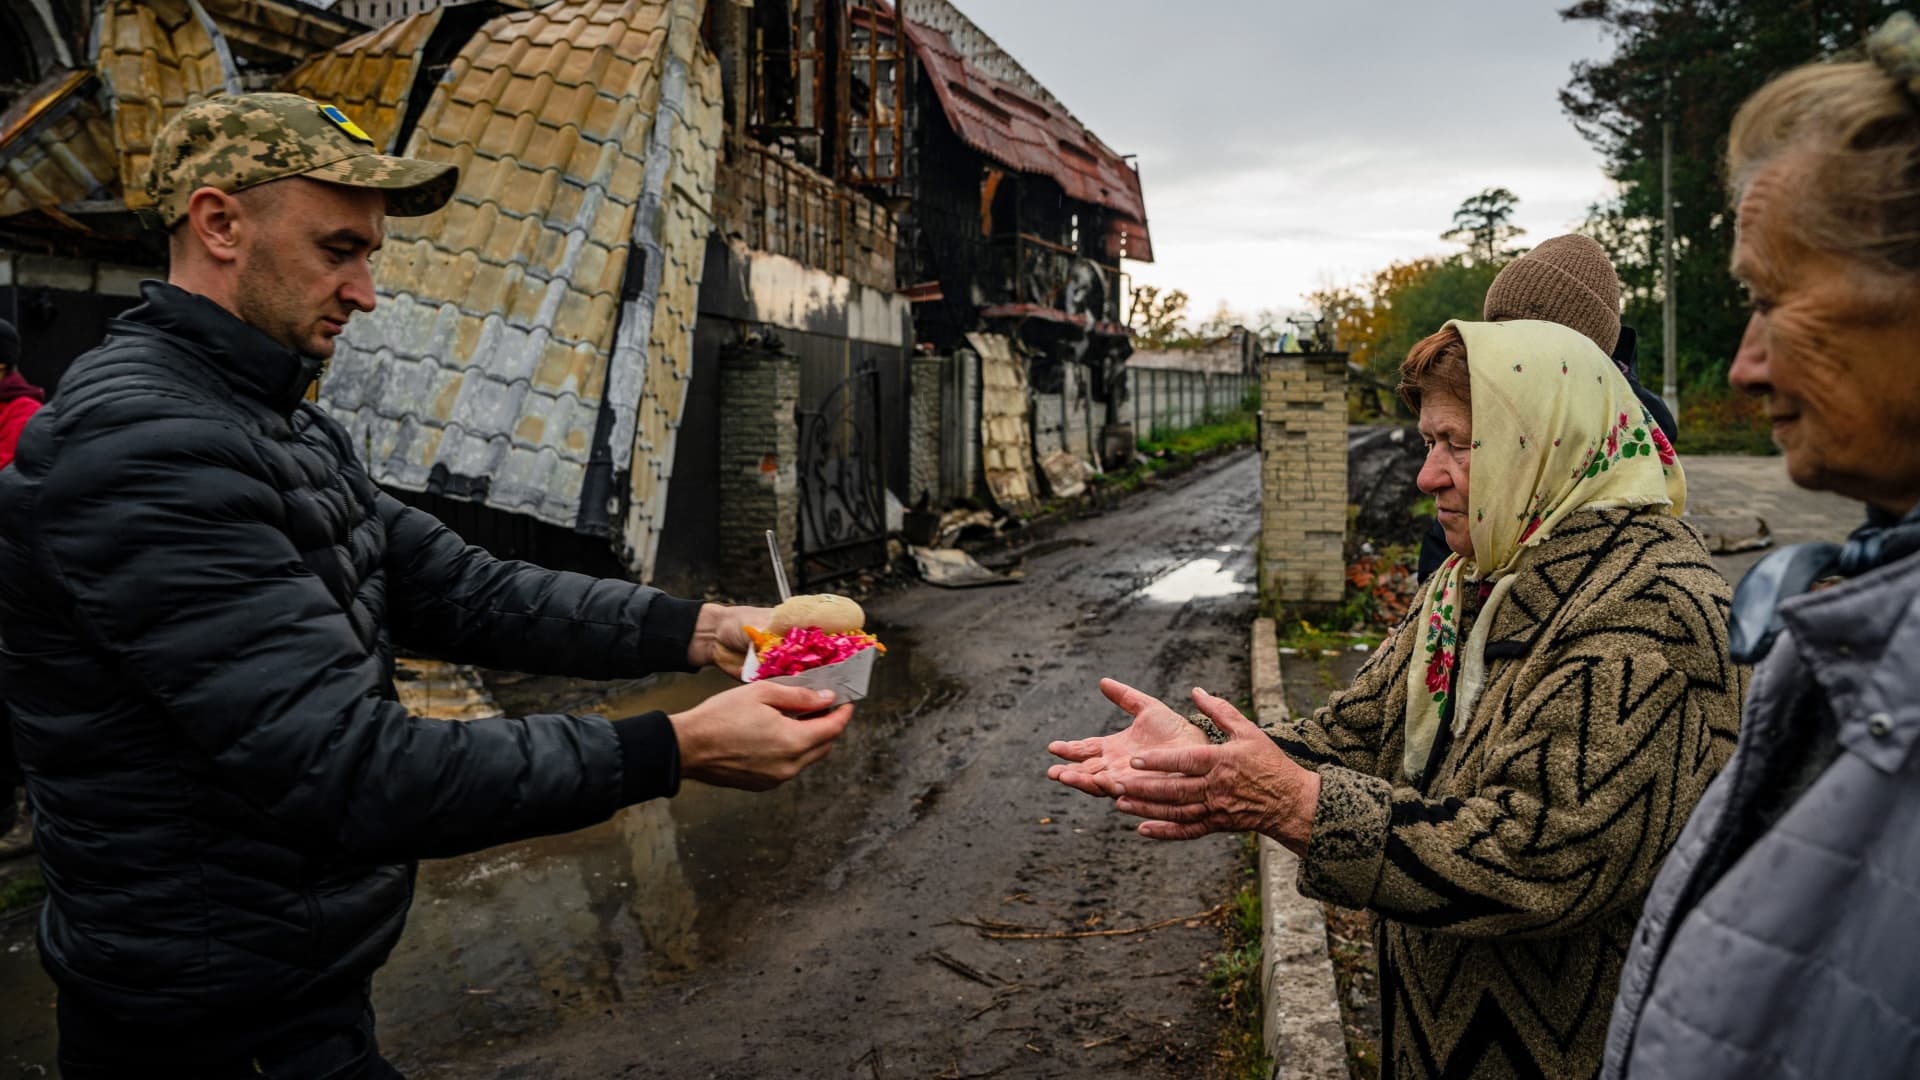 Local residents receive food and humanitarian aid in Svyatohirs'k, Donetsk region, on October 20, 2022, after the liberation of the area.